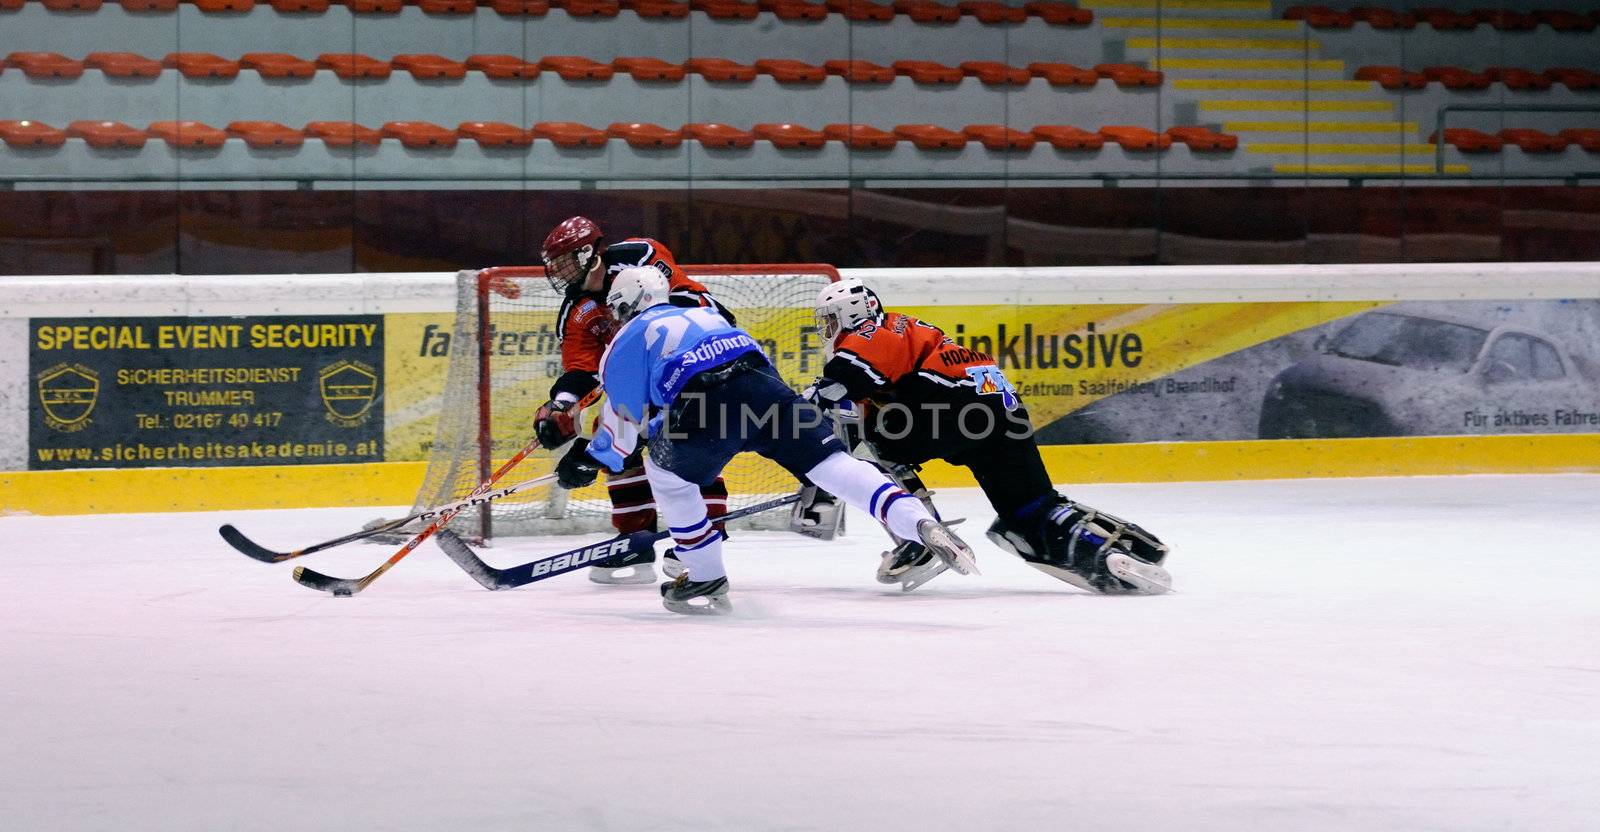 ZELL AM SEE, AUSTRIA - FEB 13: Salzburg hockey League. Goalie Hochwimmer dives to the net to save the puck. Game SV Schuttdorf vs HCS Morzg  (Result 9-3) on February 13, 2011 at the hockey rink of Zell am See